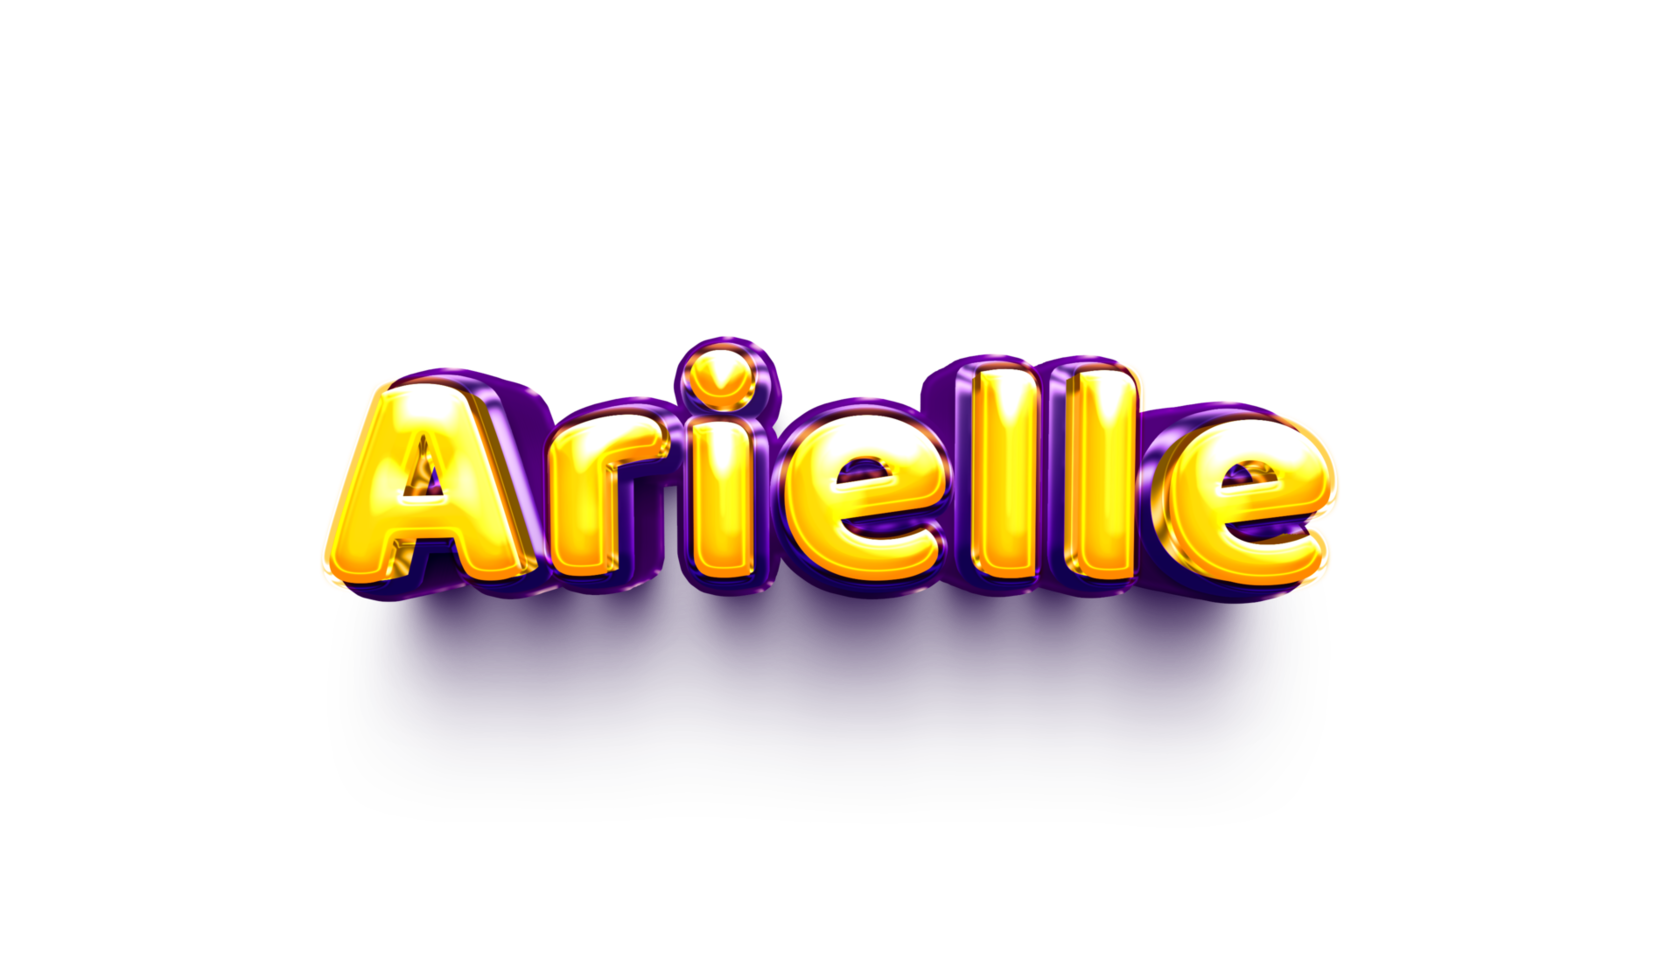 names of girls English helium balloon shiny celebration sticker 3d inflated Arielle png